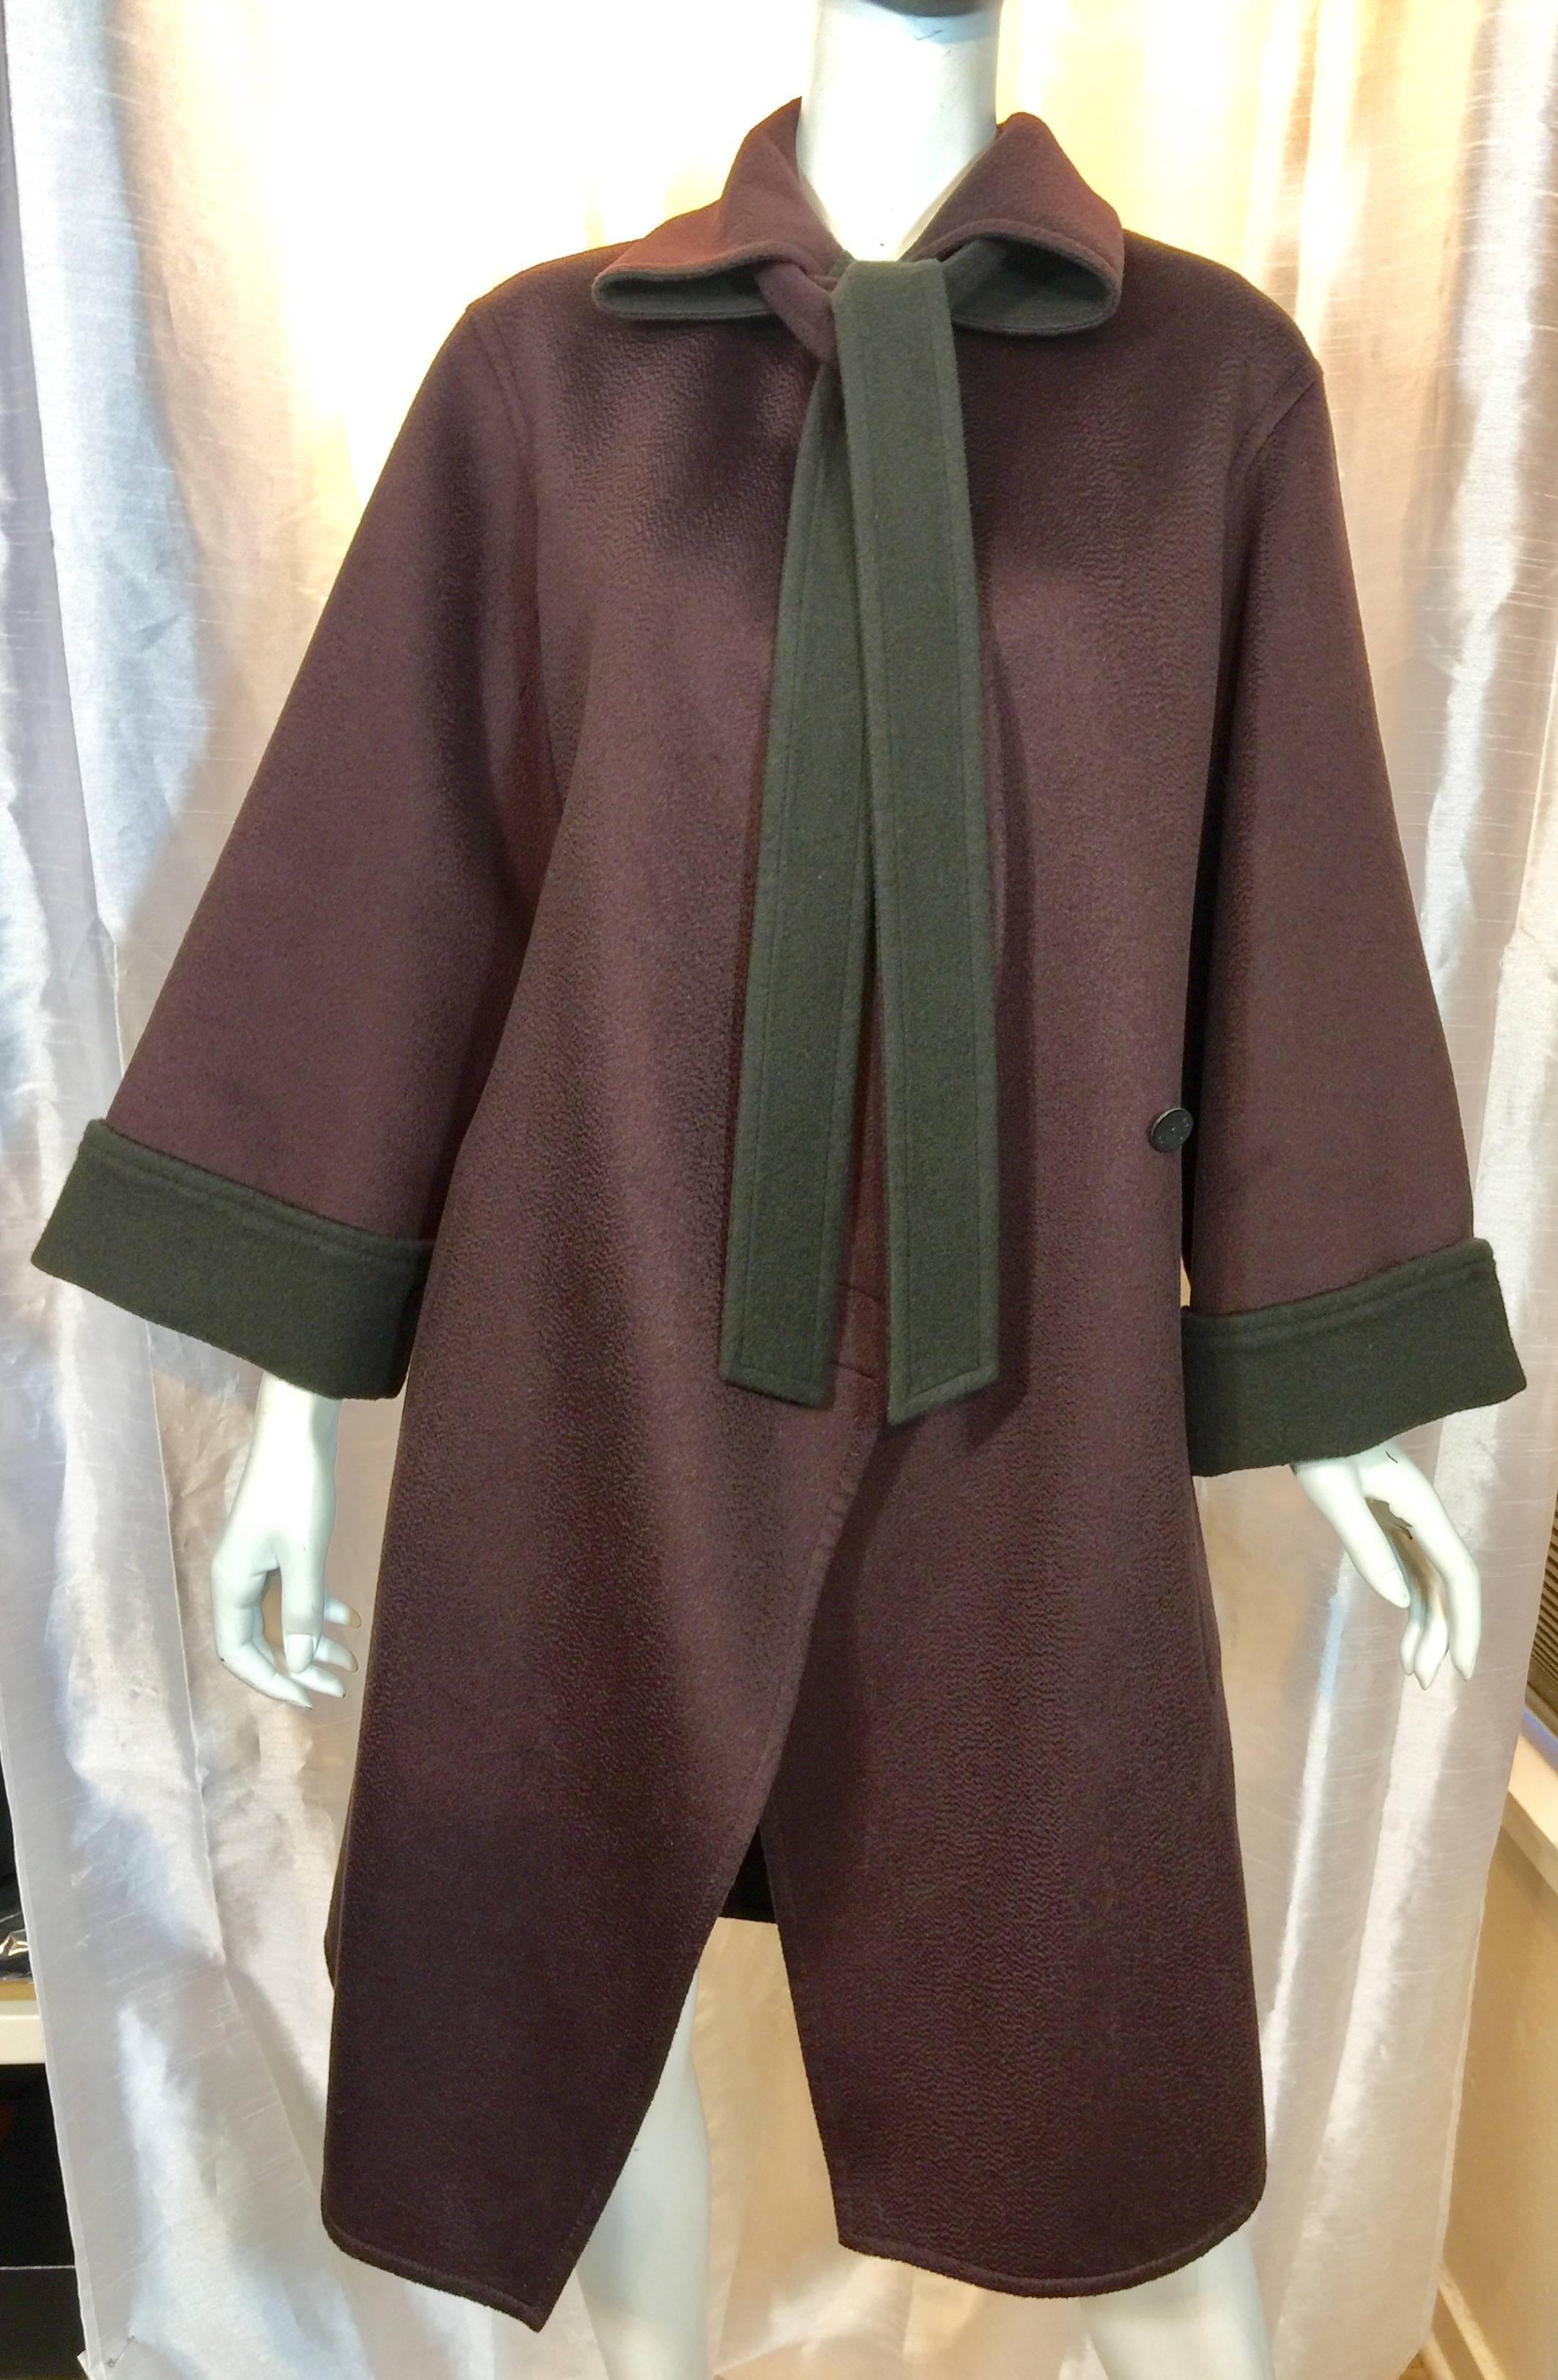 Hermes Versatile (can be worn many ways) Double Faced Cashmere Coat 

Hermes overcoat in burgundy cashmere with a double faced gray/brown reverse side. Welted seams,  belt has burgundy and gray/brown sides. Belt can be worn at waist or in collar